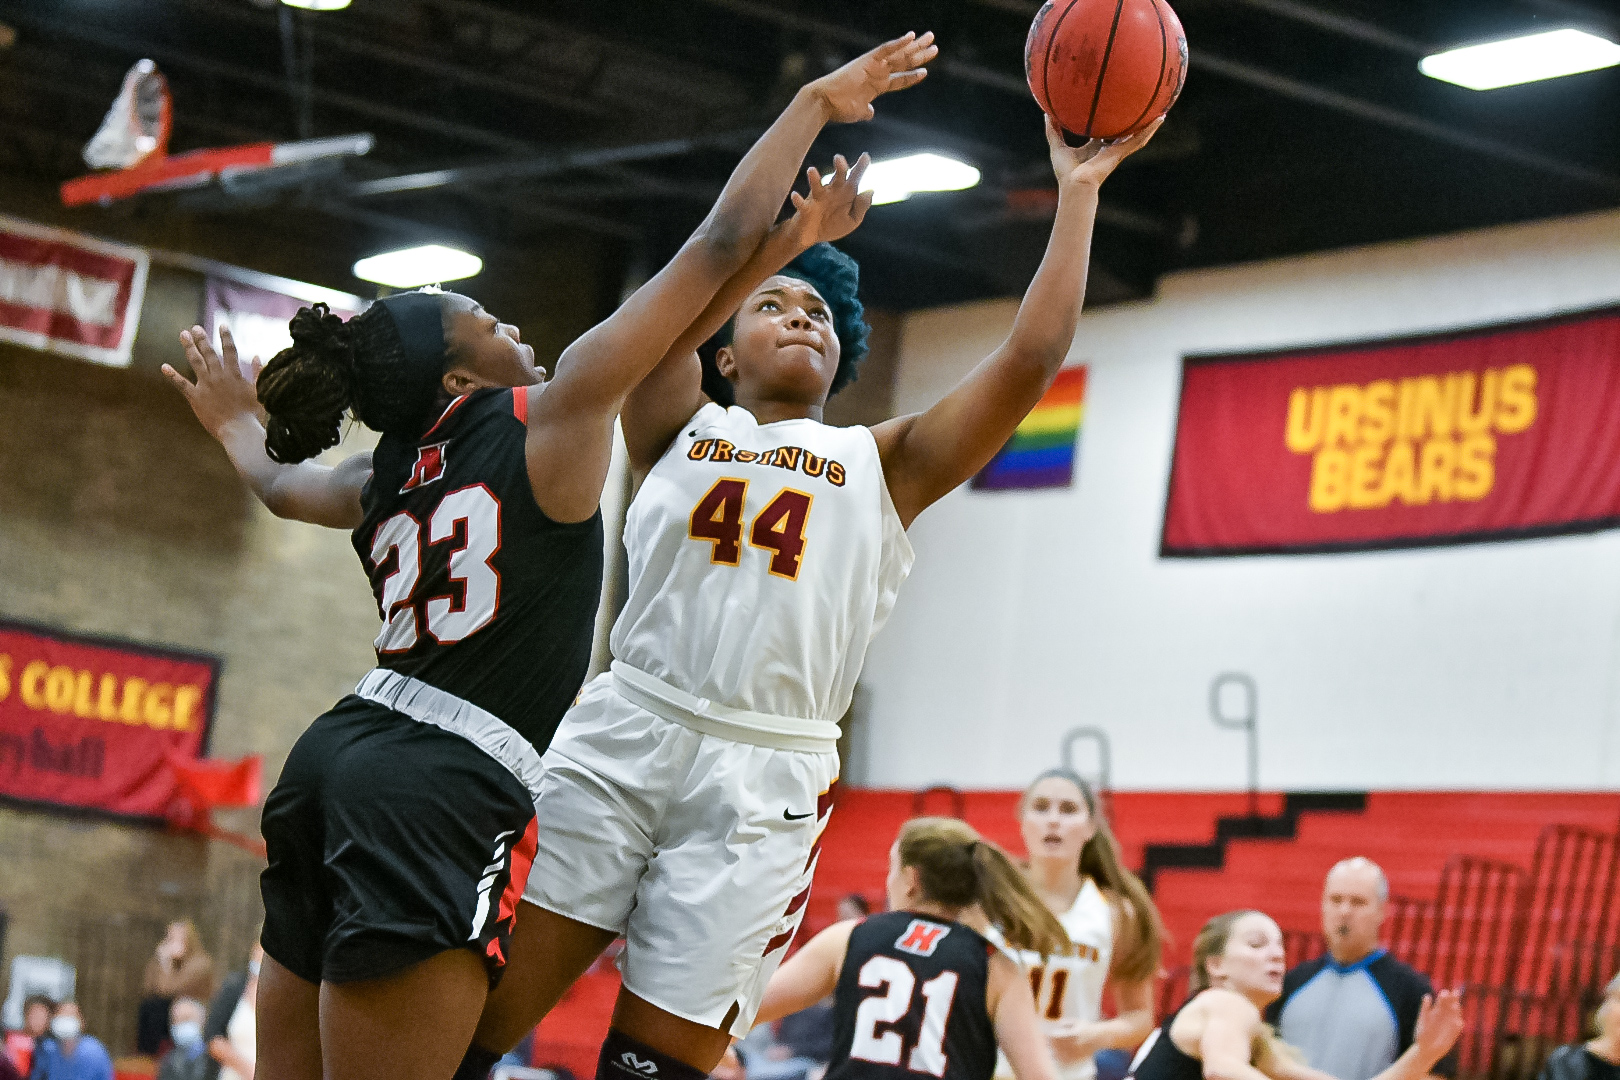 Women’s Hoops Suffers Setback on Road at Dickinson 